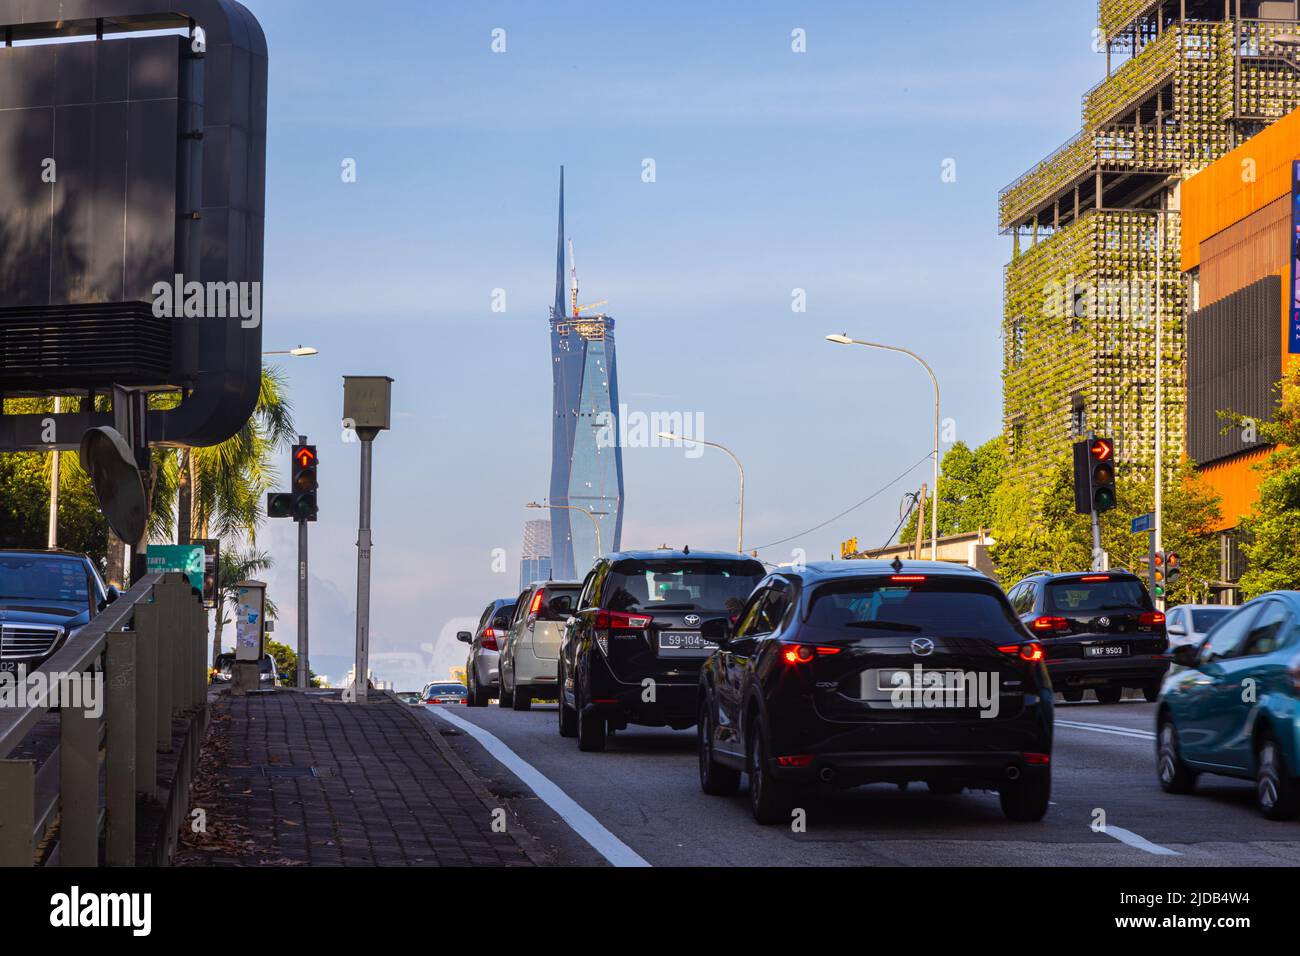 Kuala Lumpur, Malaysia - June 8, 2022: The new second tallest building in the world, Merdeka 118. The new icon behind a busy junction with high traffi Stock Photo